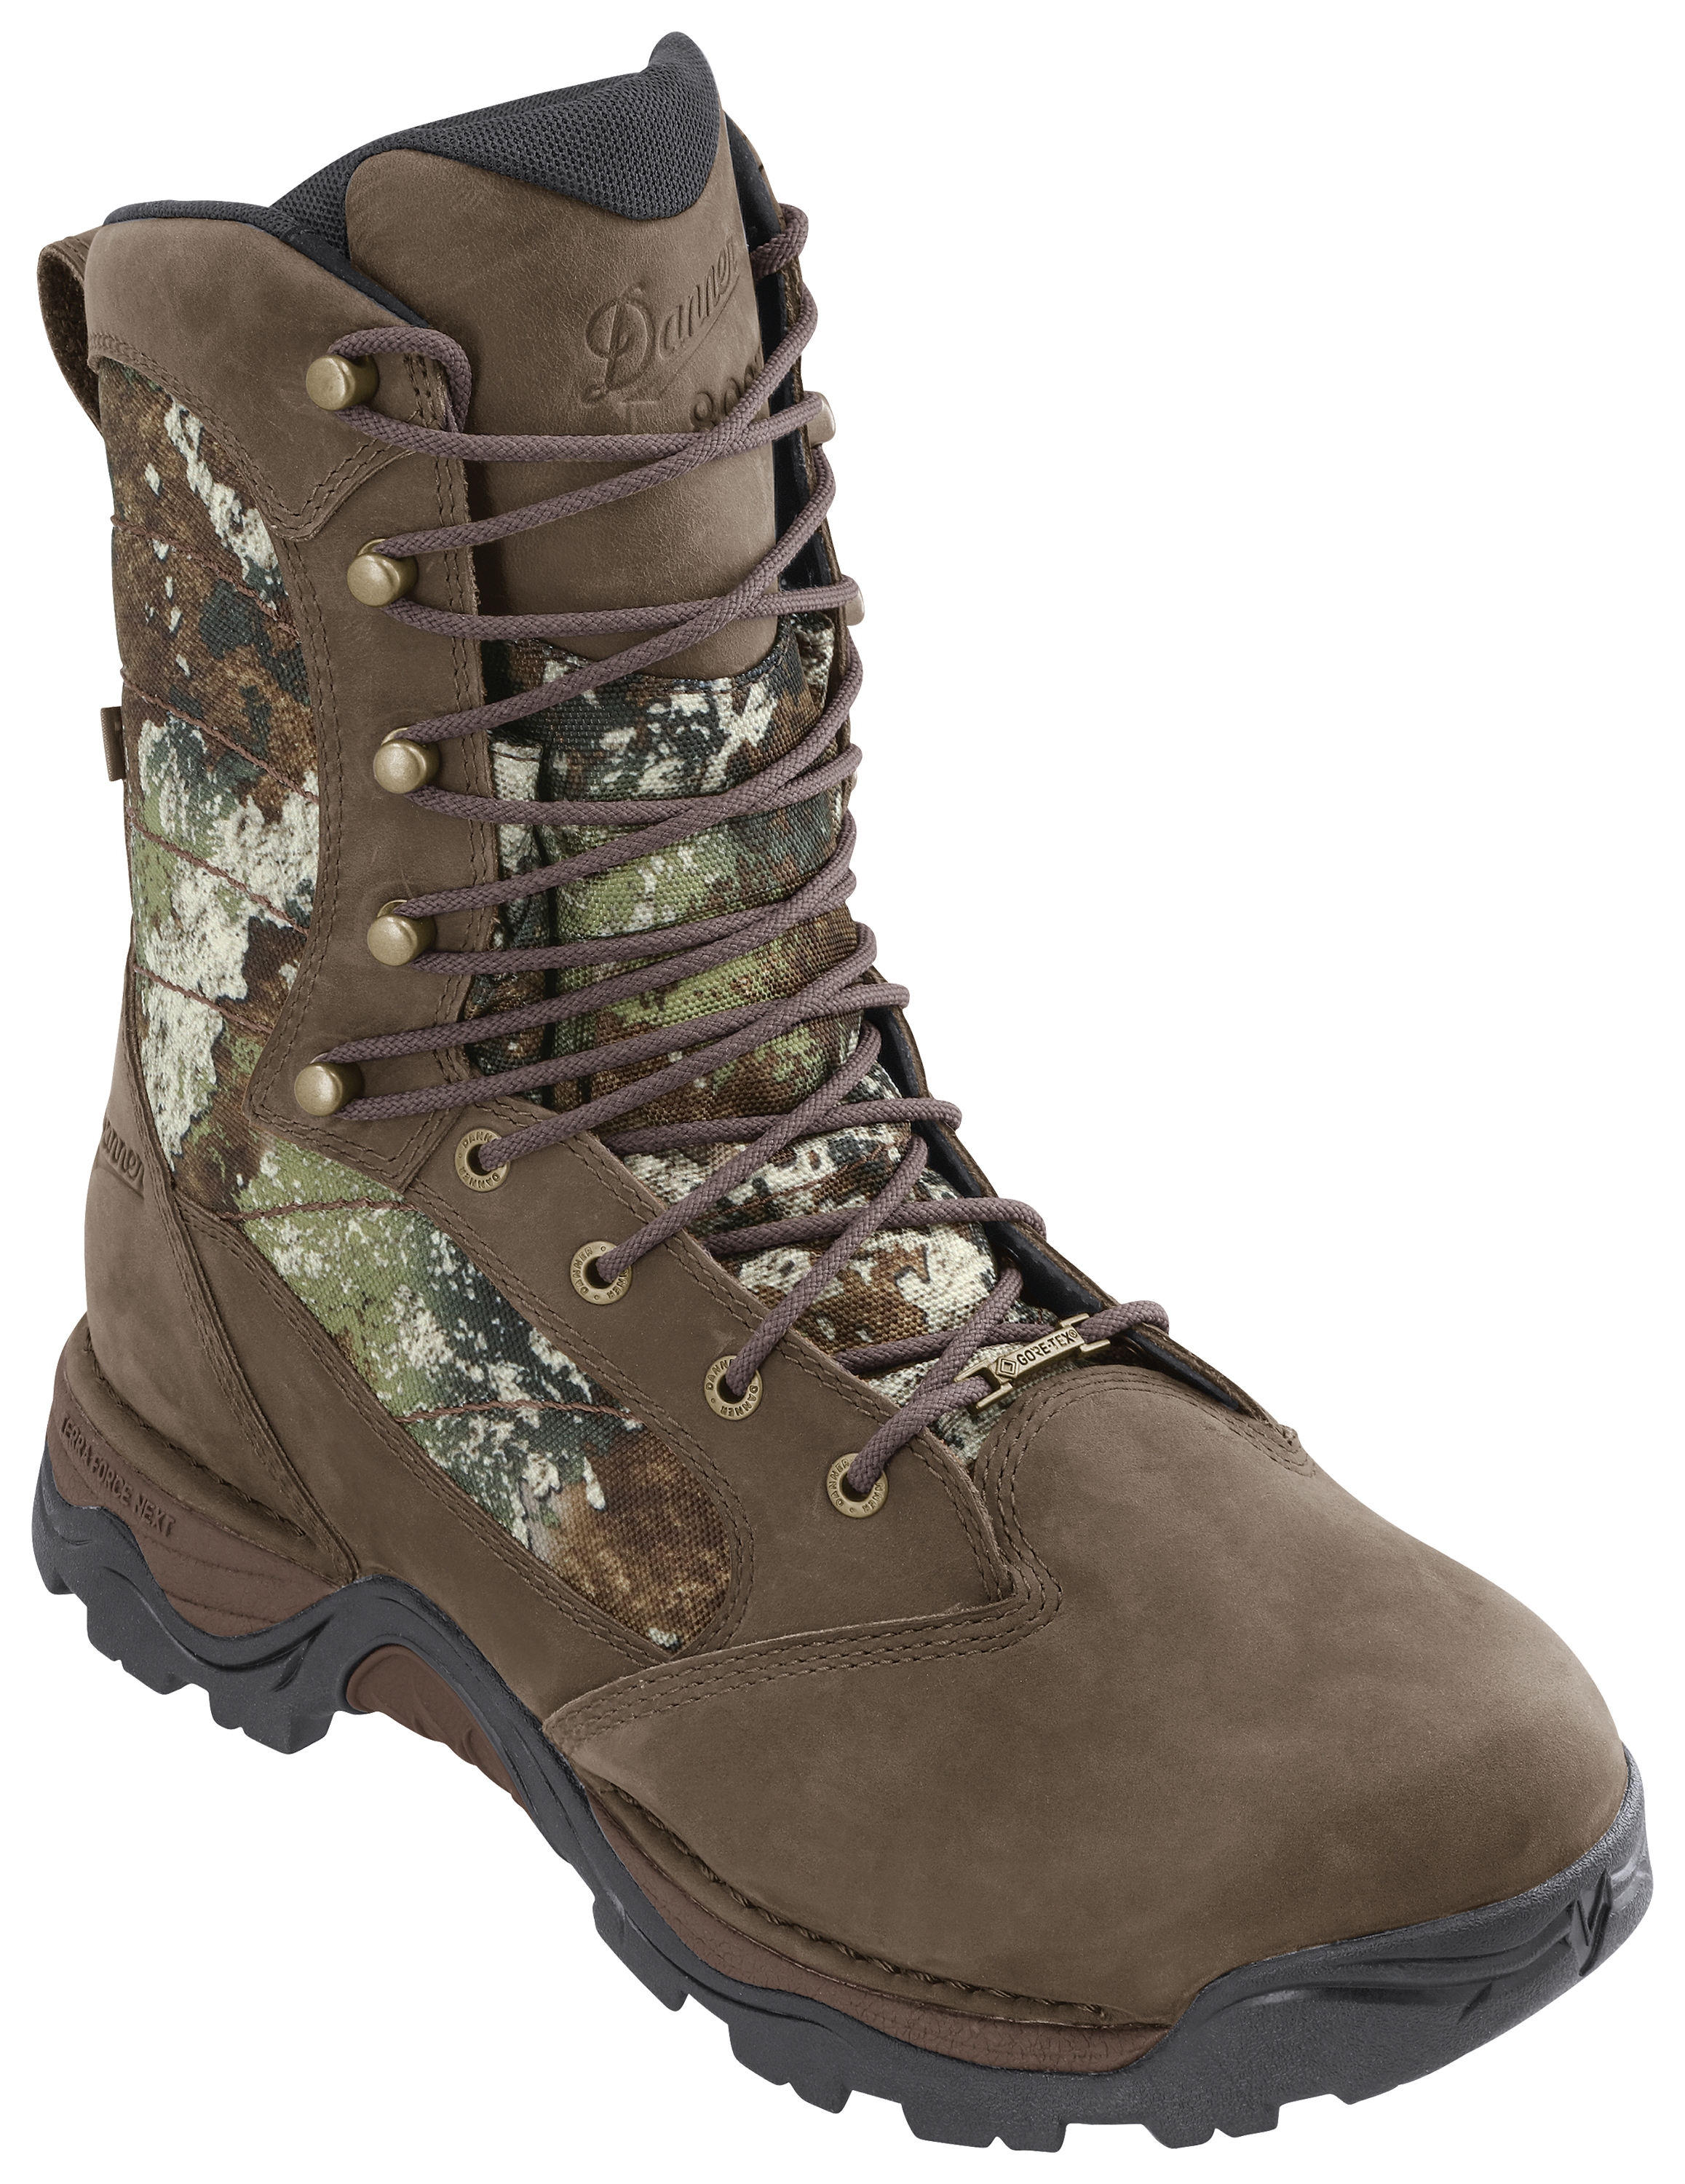 Danner Pronghorn 800 TrueTimber Strata Insulated GORE-TEX Hunting Boots for Men - 8.5M